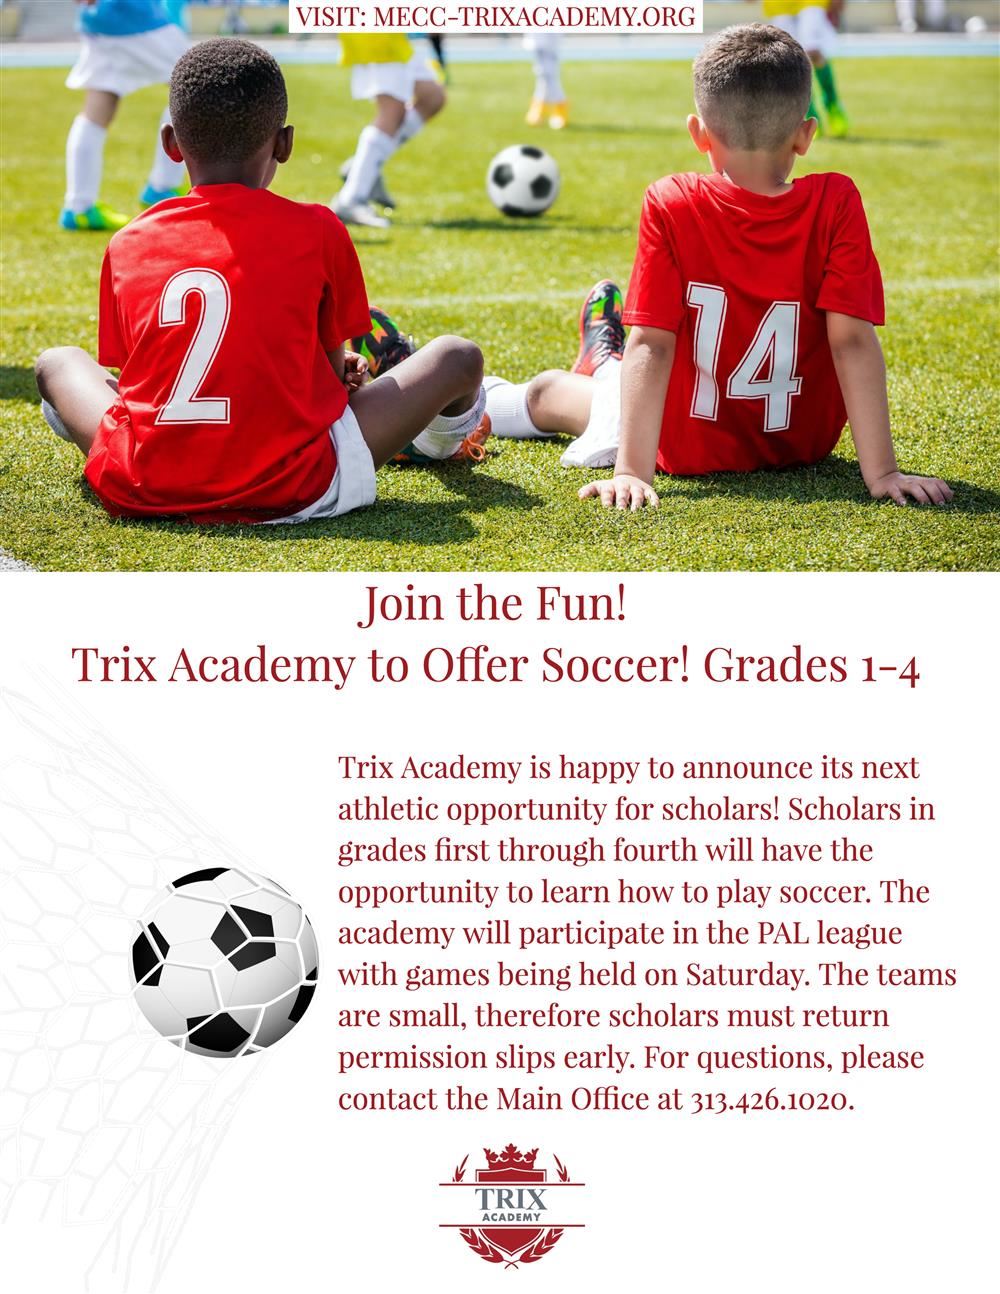 Trix Academy to now offer soccer for grades 1-4. Contact the main office for details  